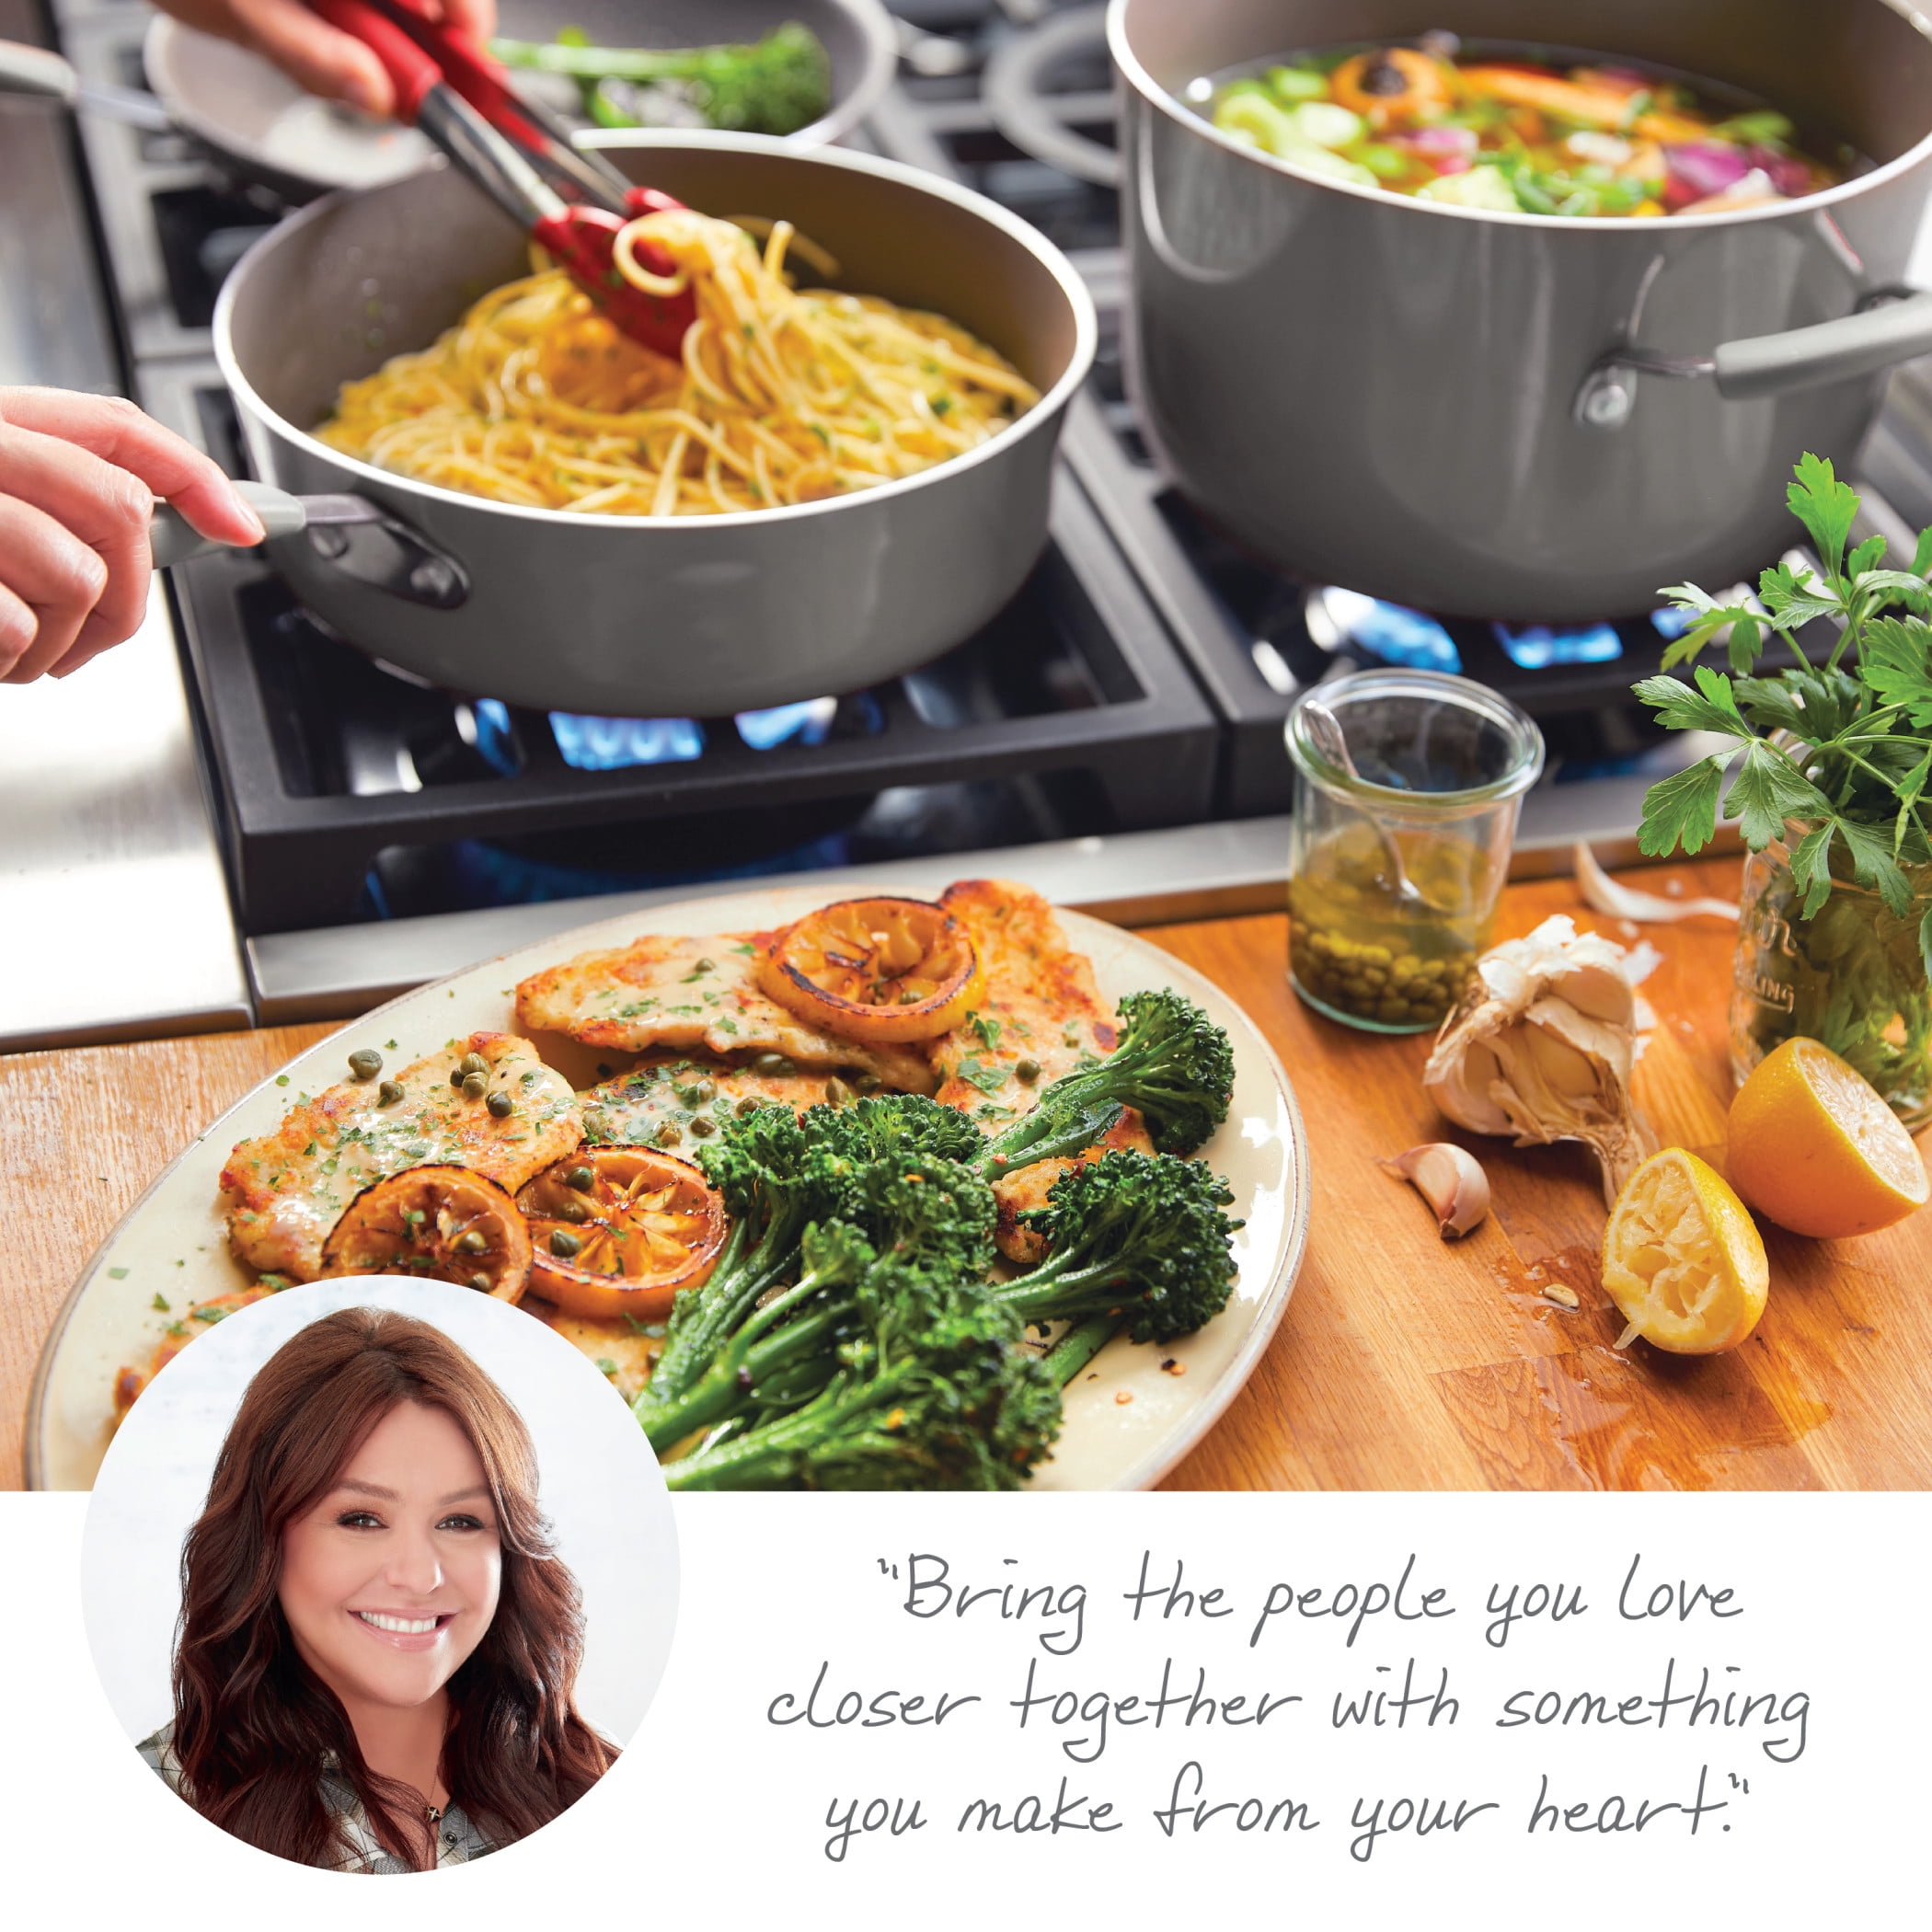 Rachael Ray 12-Piece Get Cooking Nonstick Pots and Pans Set/Cookware Set, Gray